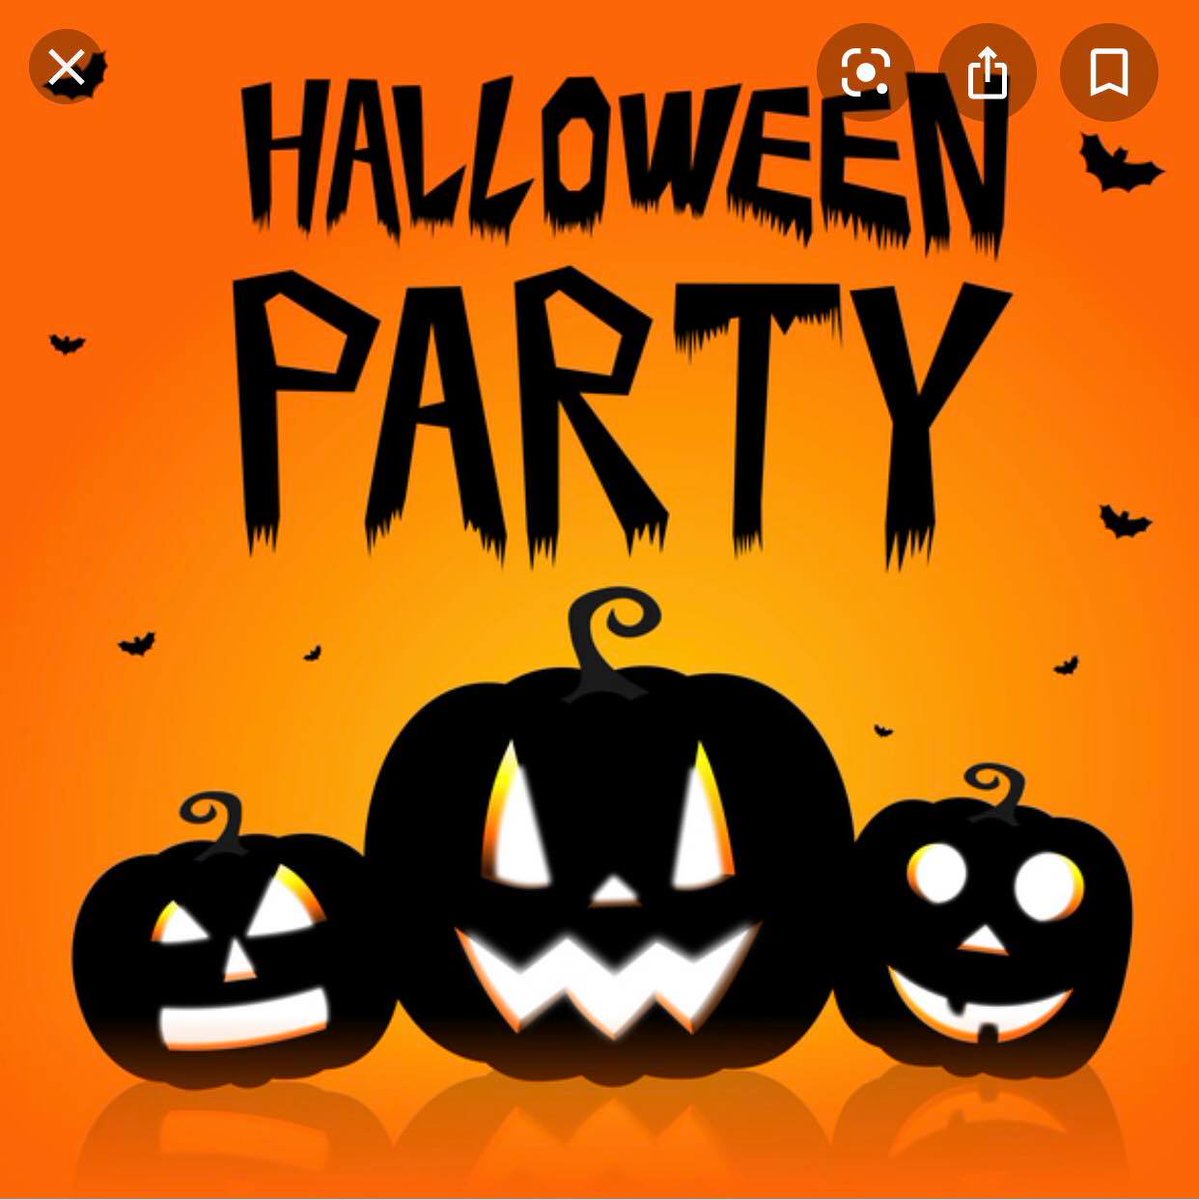 🎃👻💀🦇What are your plans for #Halloween night? Enjoy music, dancing, prizes and more at #LiebeWein 🍷#HalloweenParty with #HairSupply!!